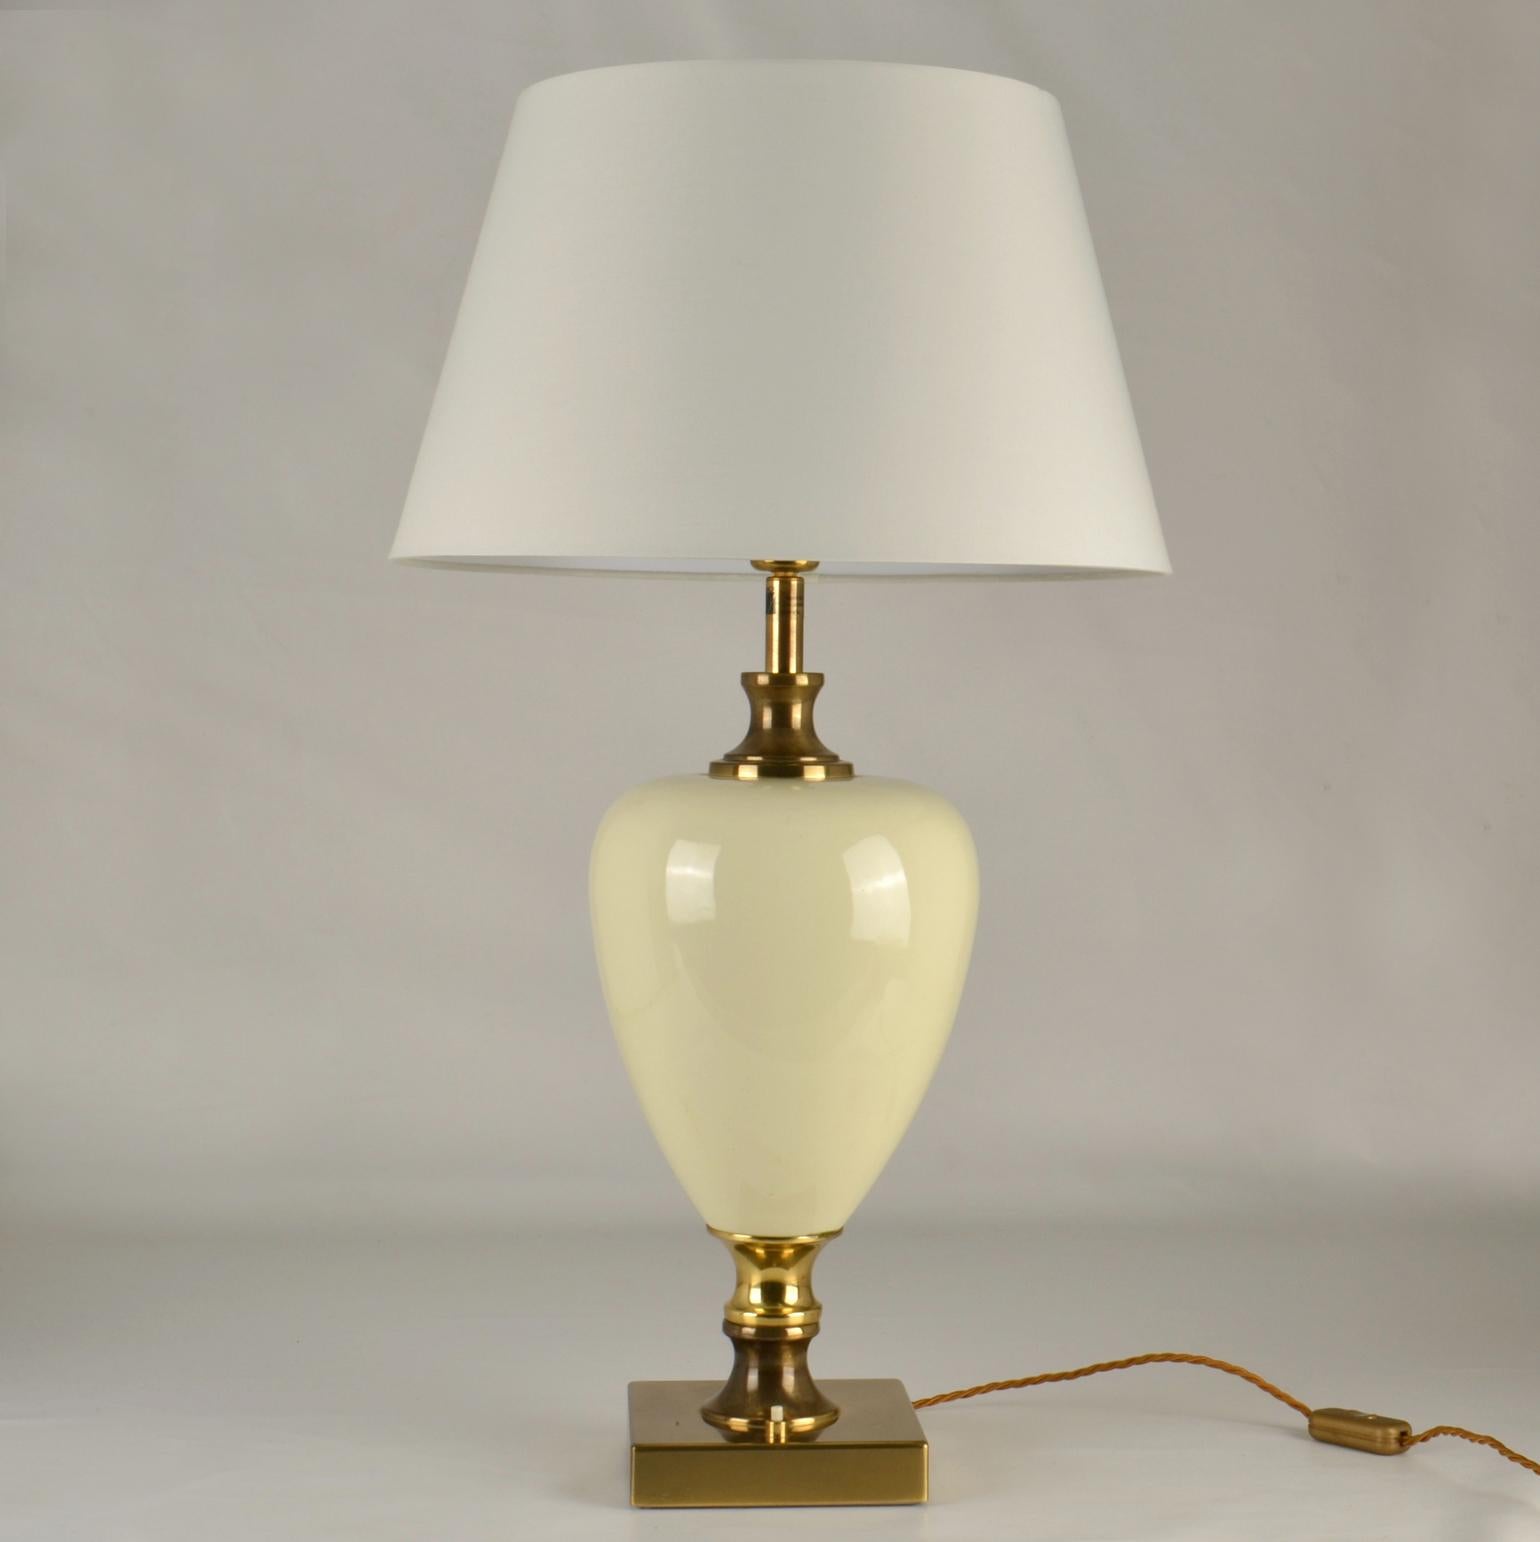 Pair of Cream Porcelain and Brass Table Lamps by Zonca, Italy, 1970s For Sale 5